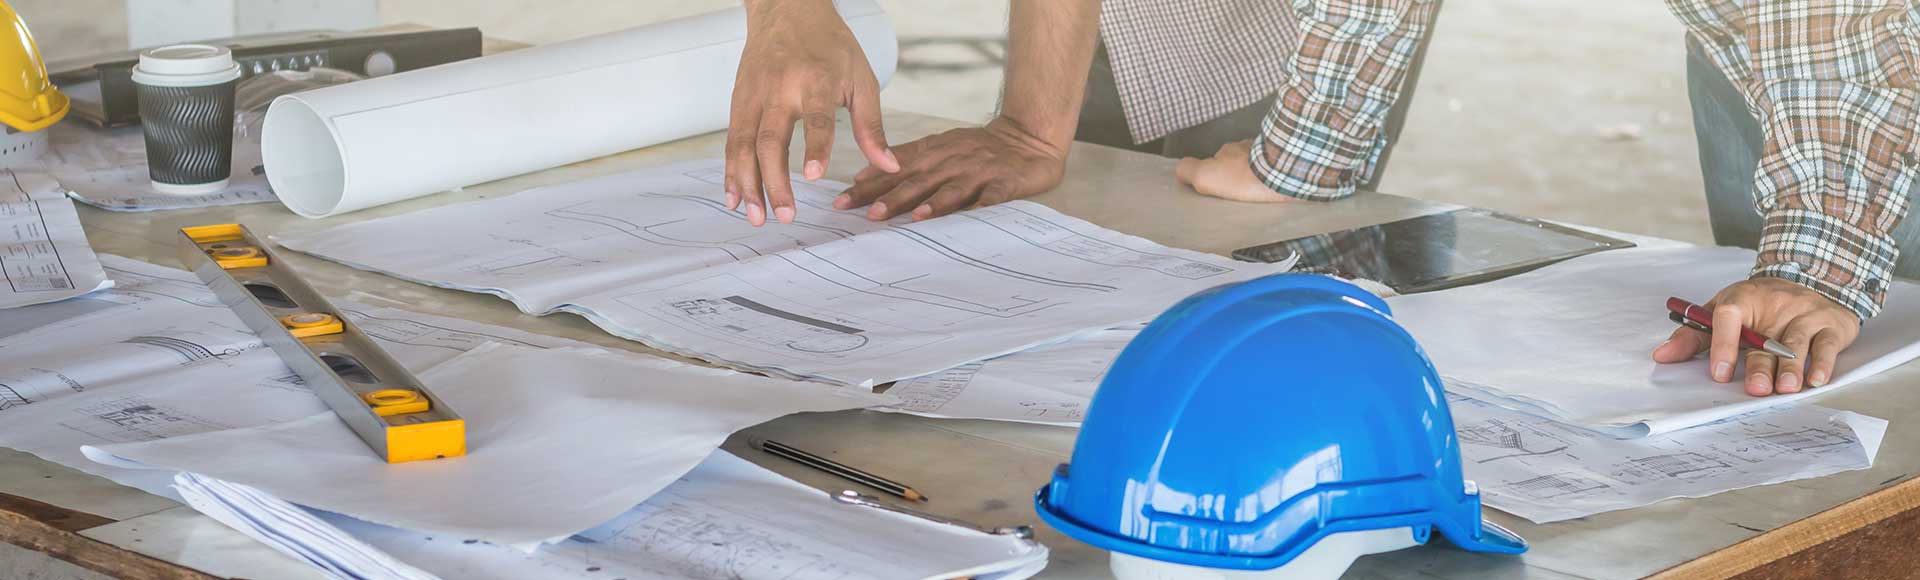 Hardhat and plans